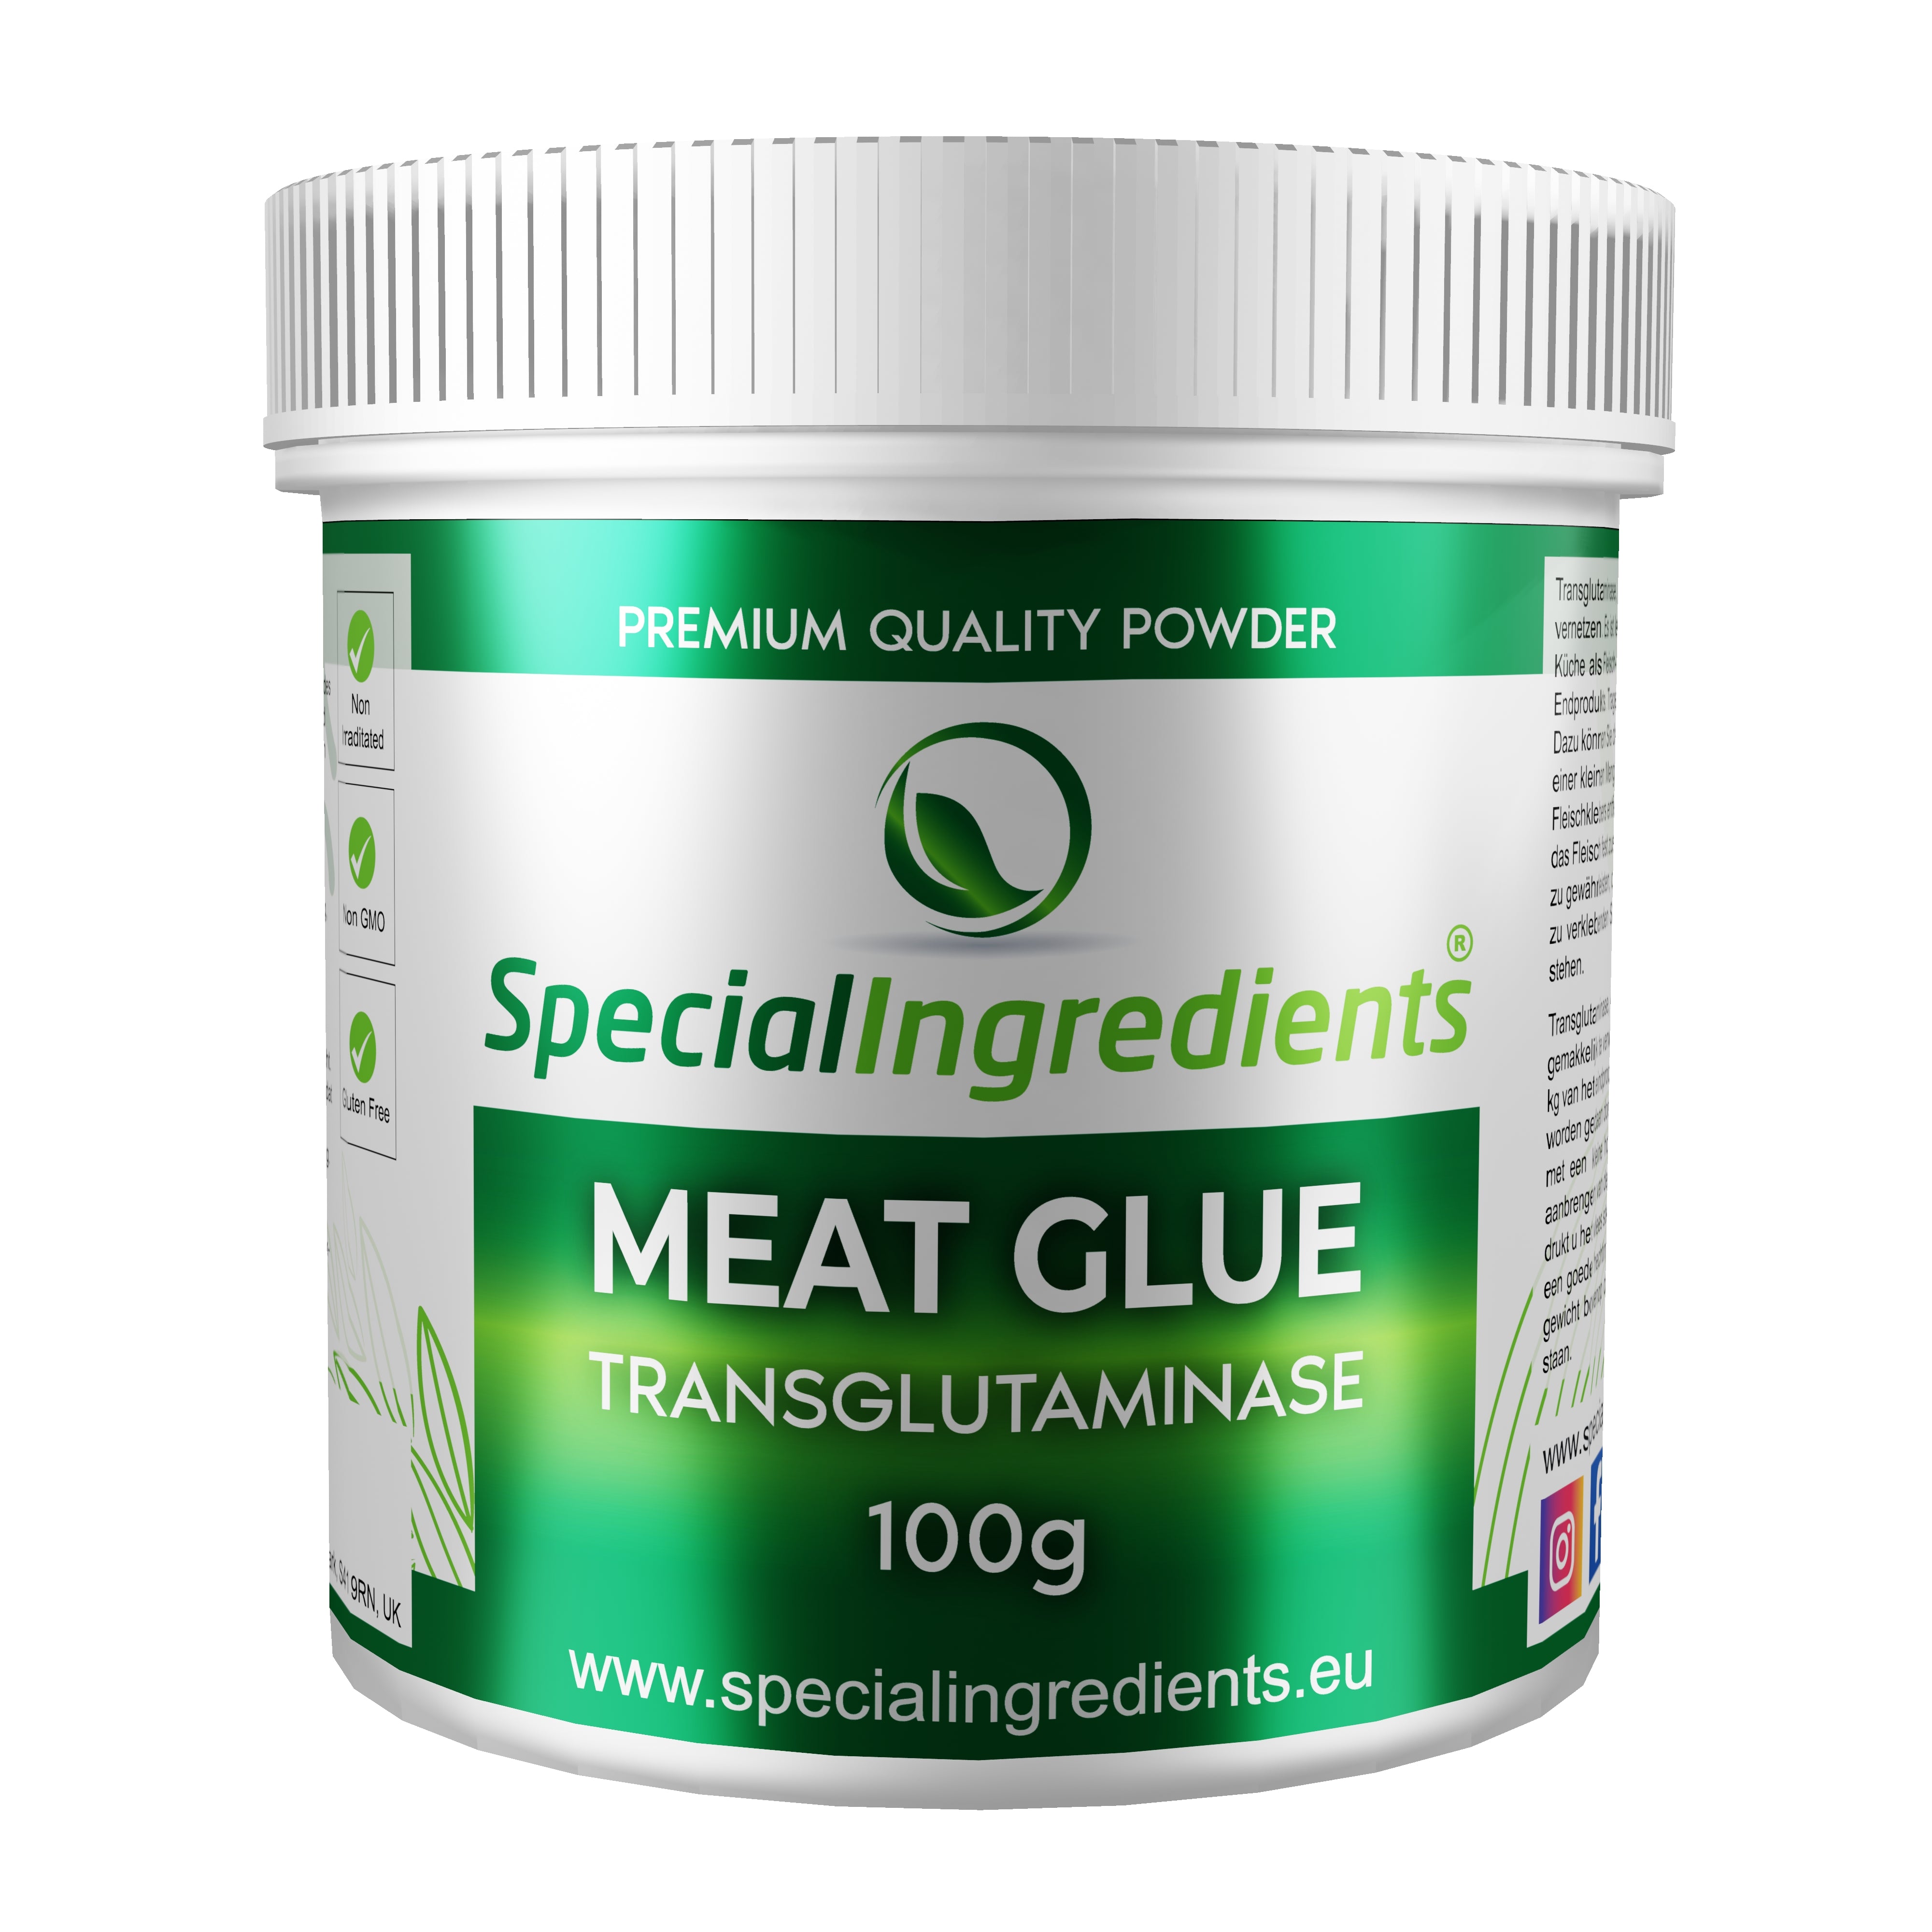 What Is Meat Glue (Transglutaminase)? And Is It Gluten-Free?